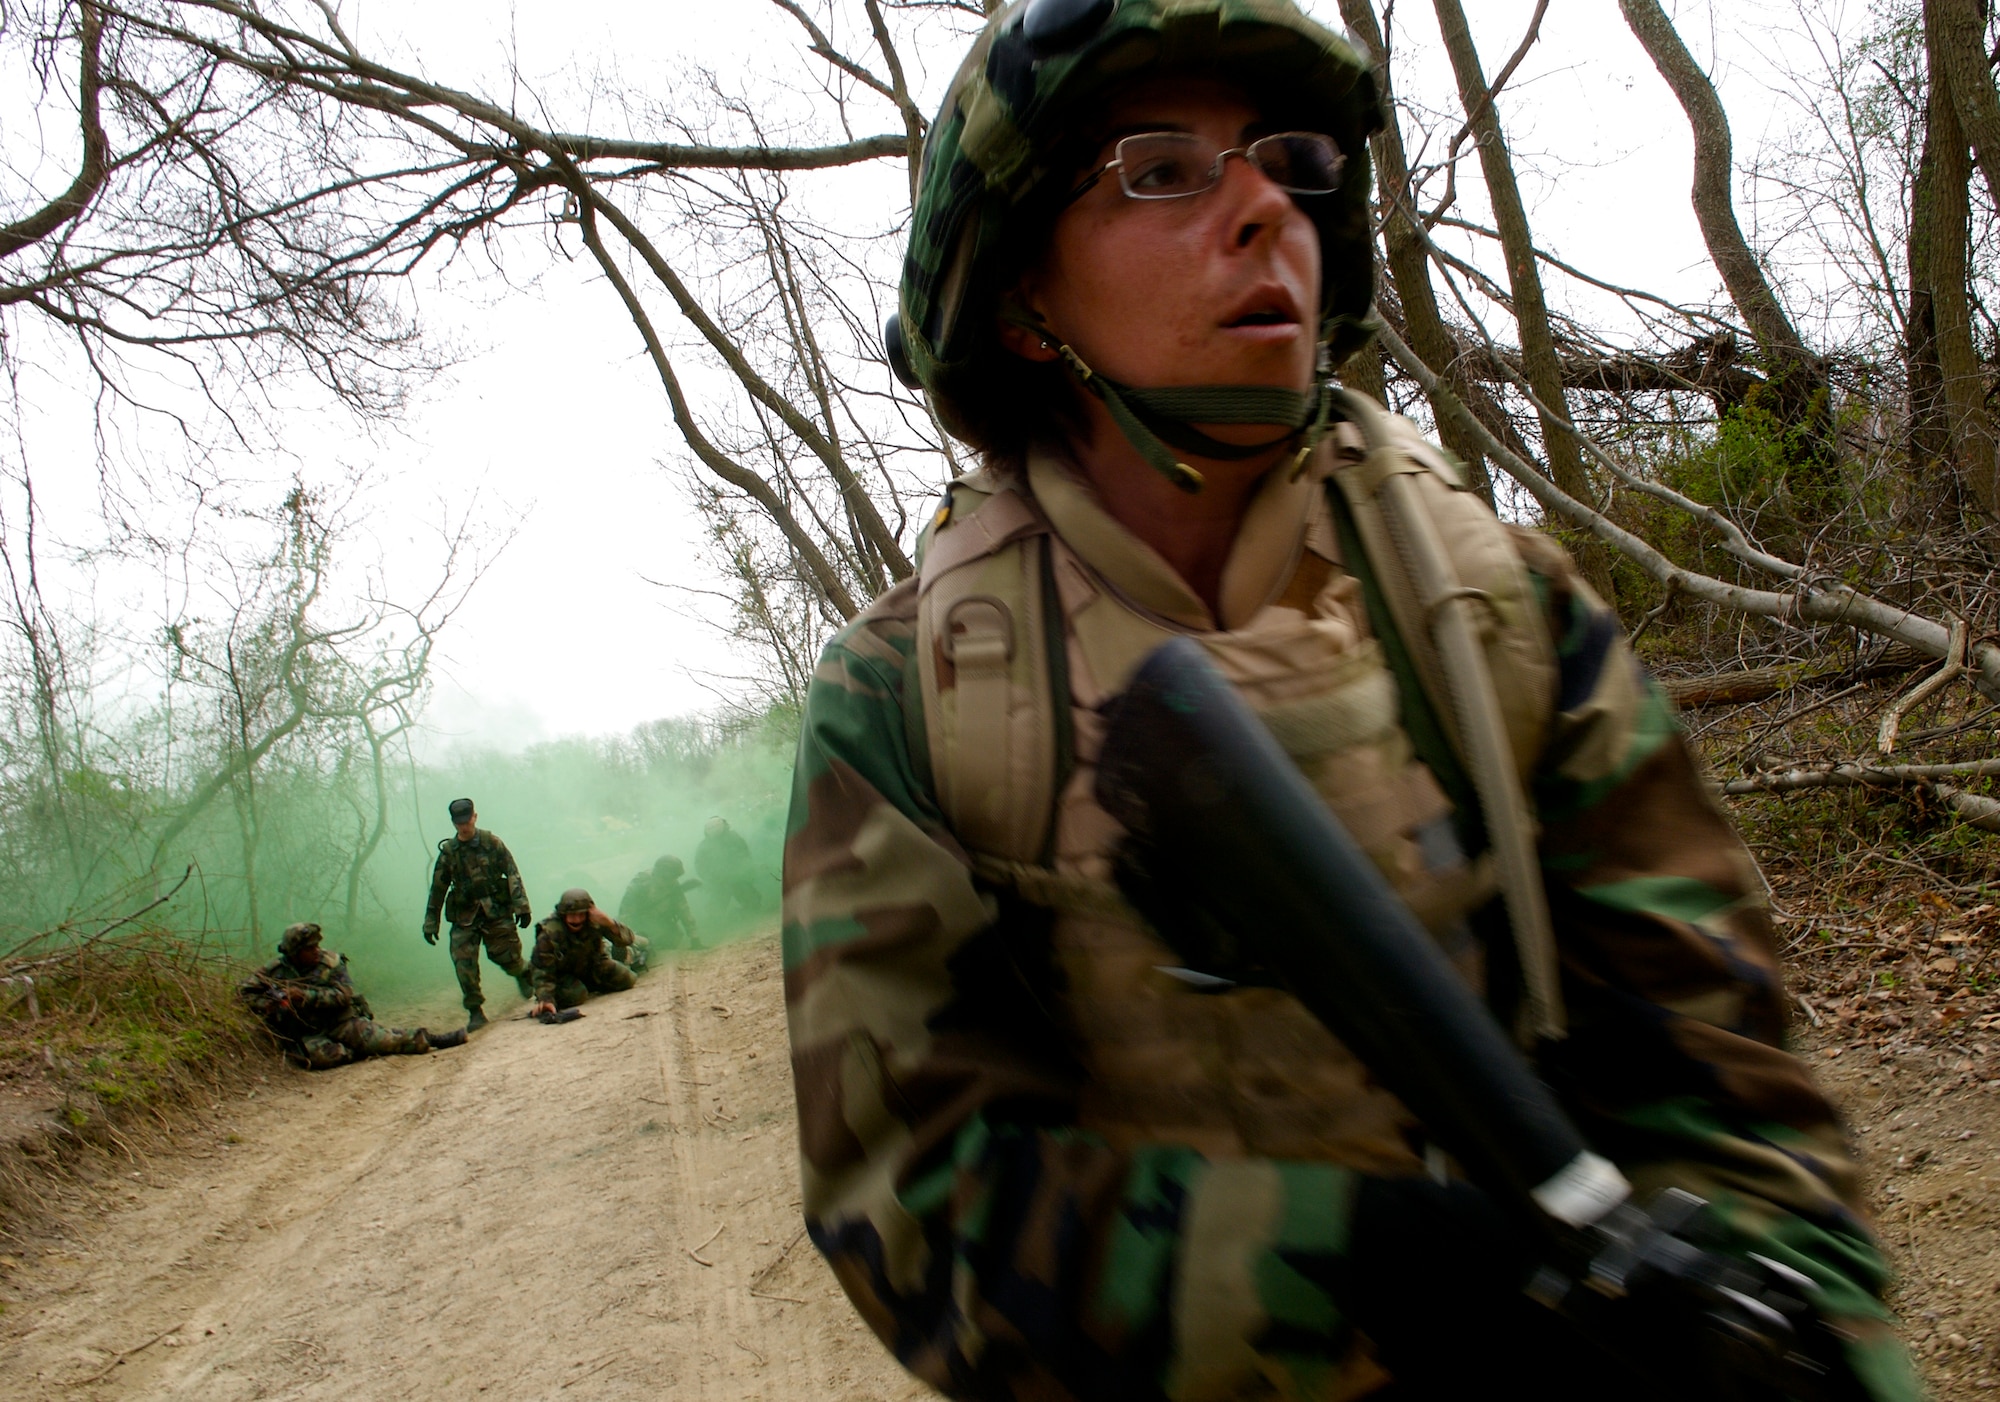 Capt. Sandra McDonald, a student  in Advanced Contingency Skills Training Course 08-4, provides security while fellow classmates attempt to carry  simulated wounded patients to a safe area during the combat first aid portion of the ACST course on a Fort Dix, N.J., range April 11, 2008.  The course is taught by the U.S. Air Force Expeditionary Center's 421st Combat Training Squadron and prepares Airmen for upcoming deployments. (U.S. Air Force Photo/Staff Sgt Samuel Rogers)